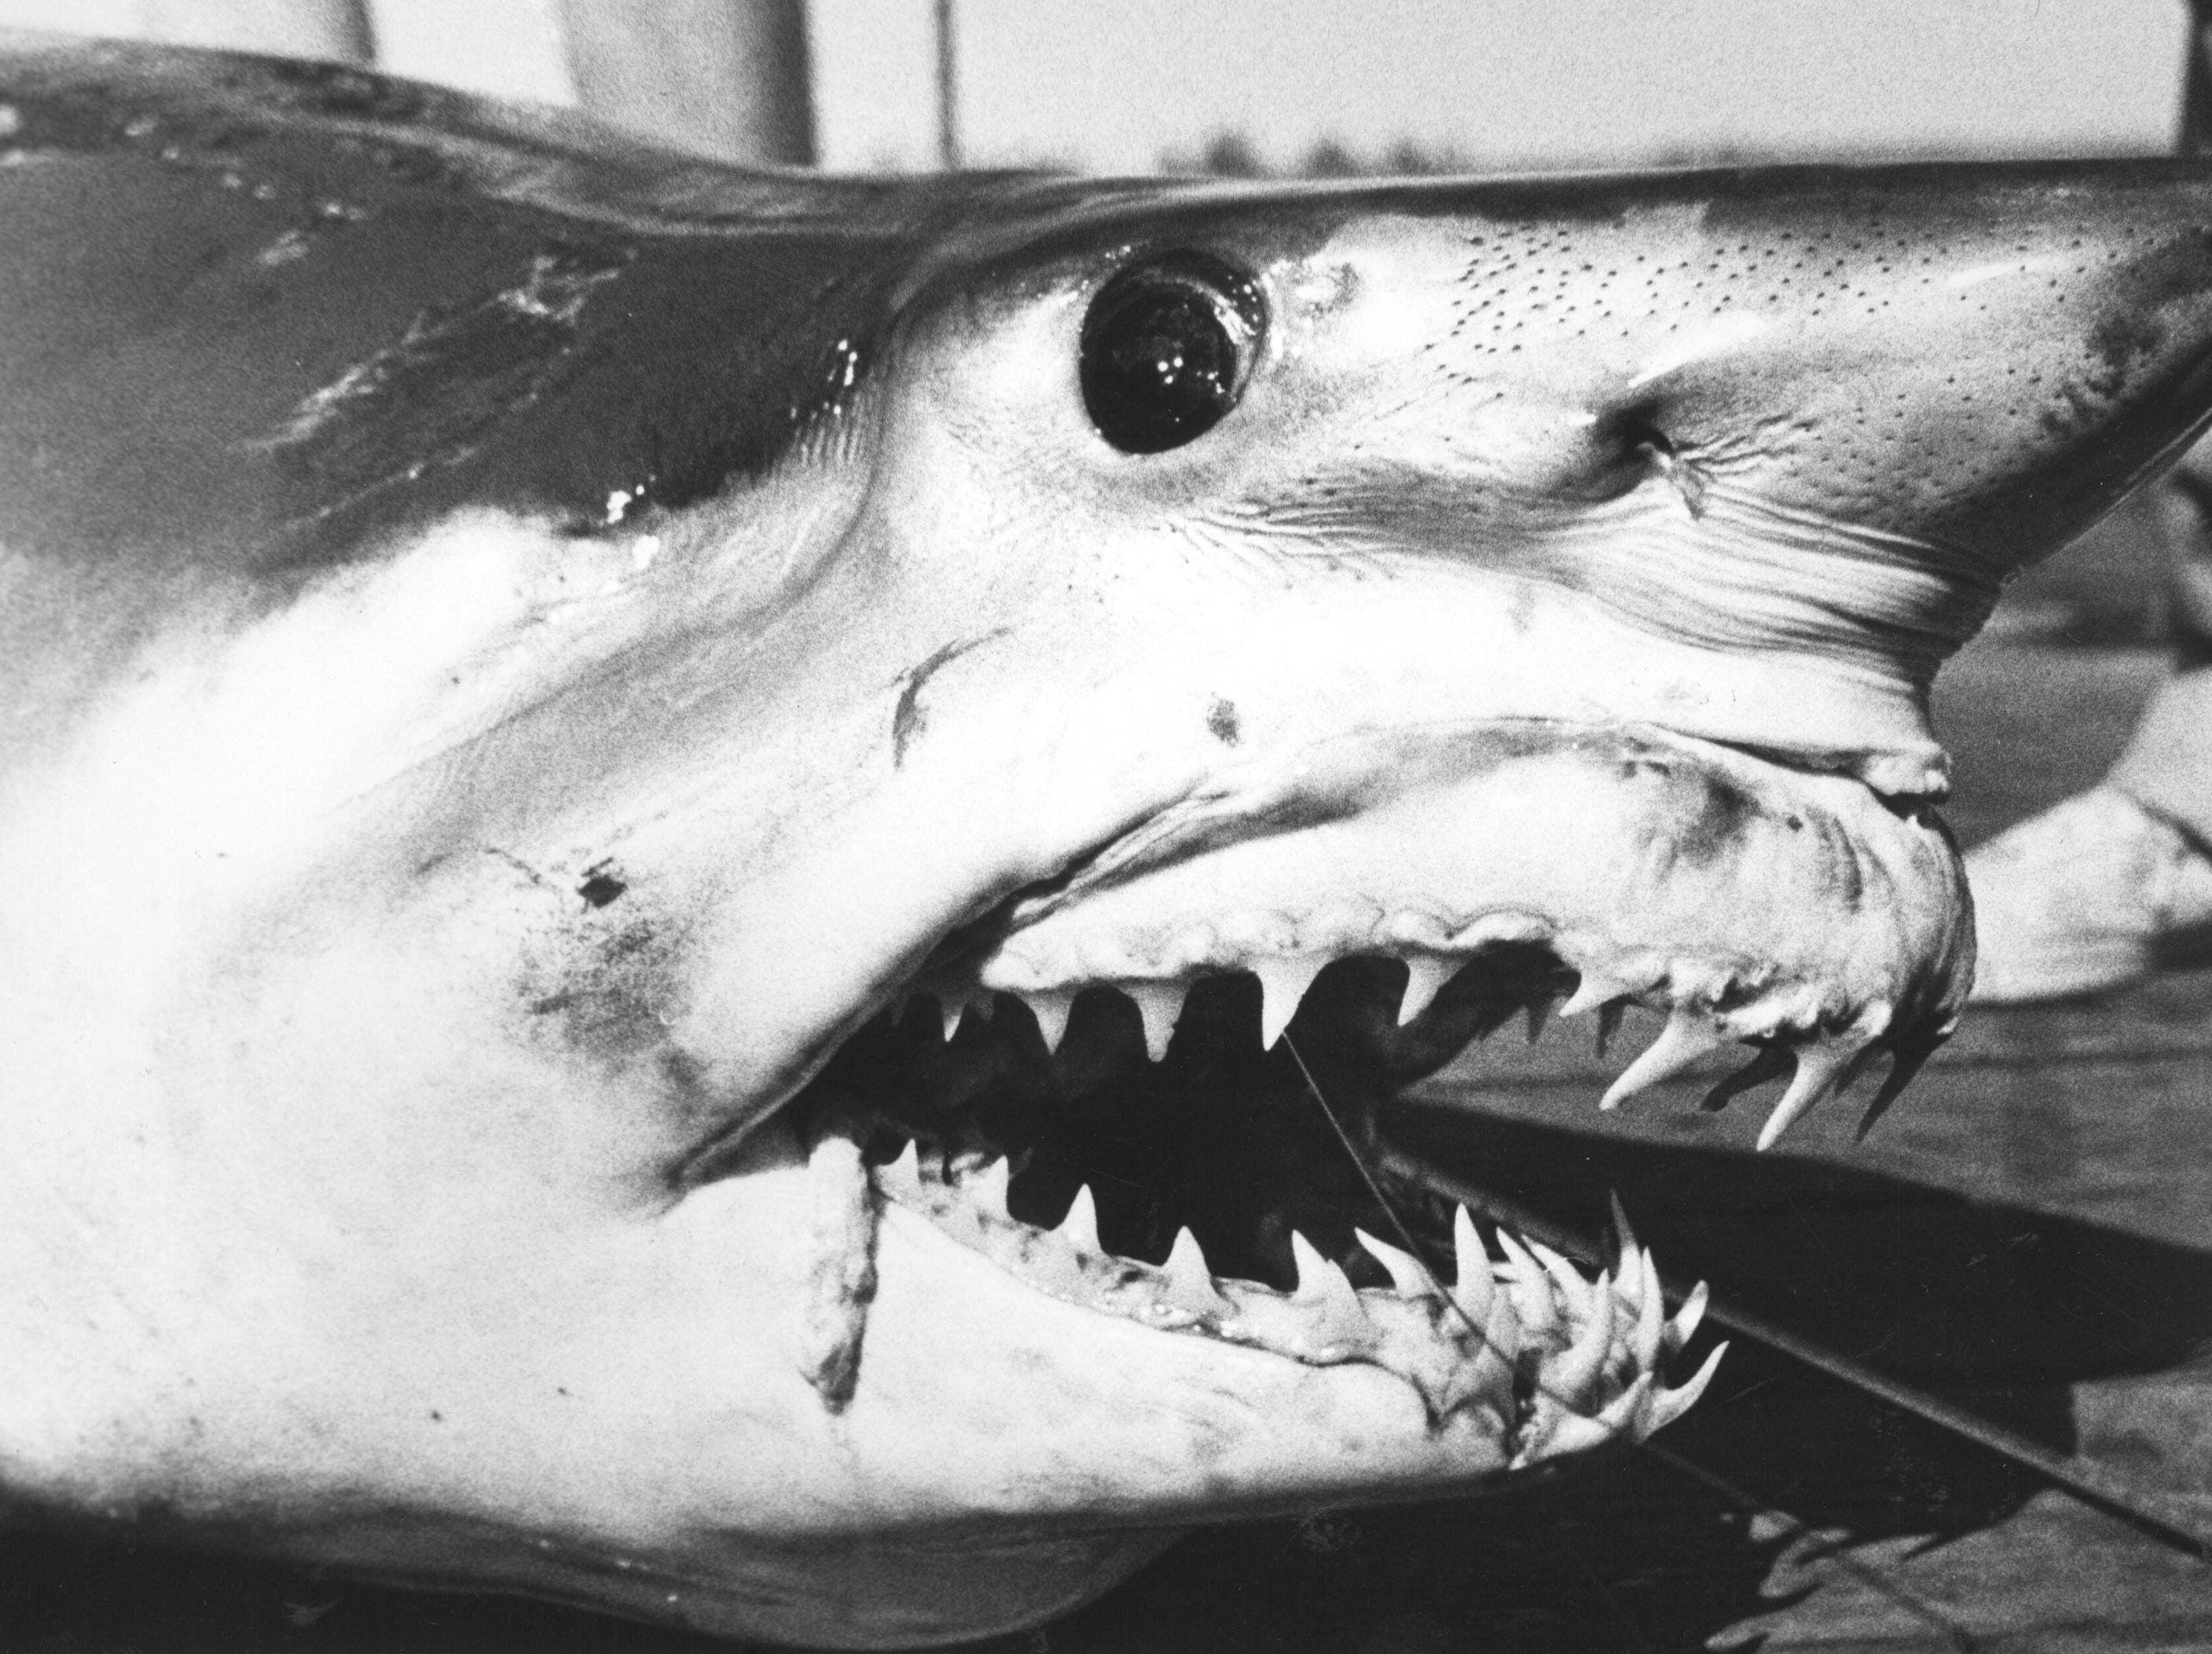 (OCT. 9, 1981) This 344-pound mako shark is the prized catch of Craig Raab of Sayreville.